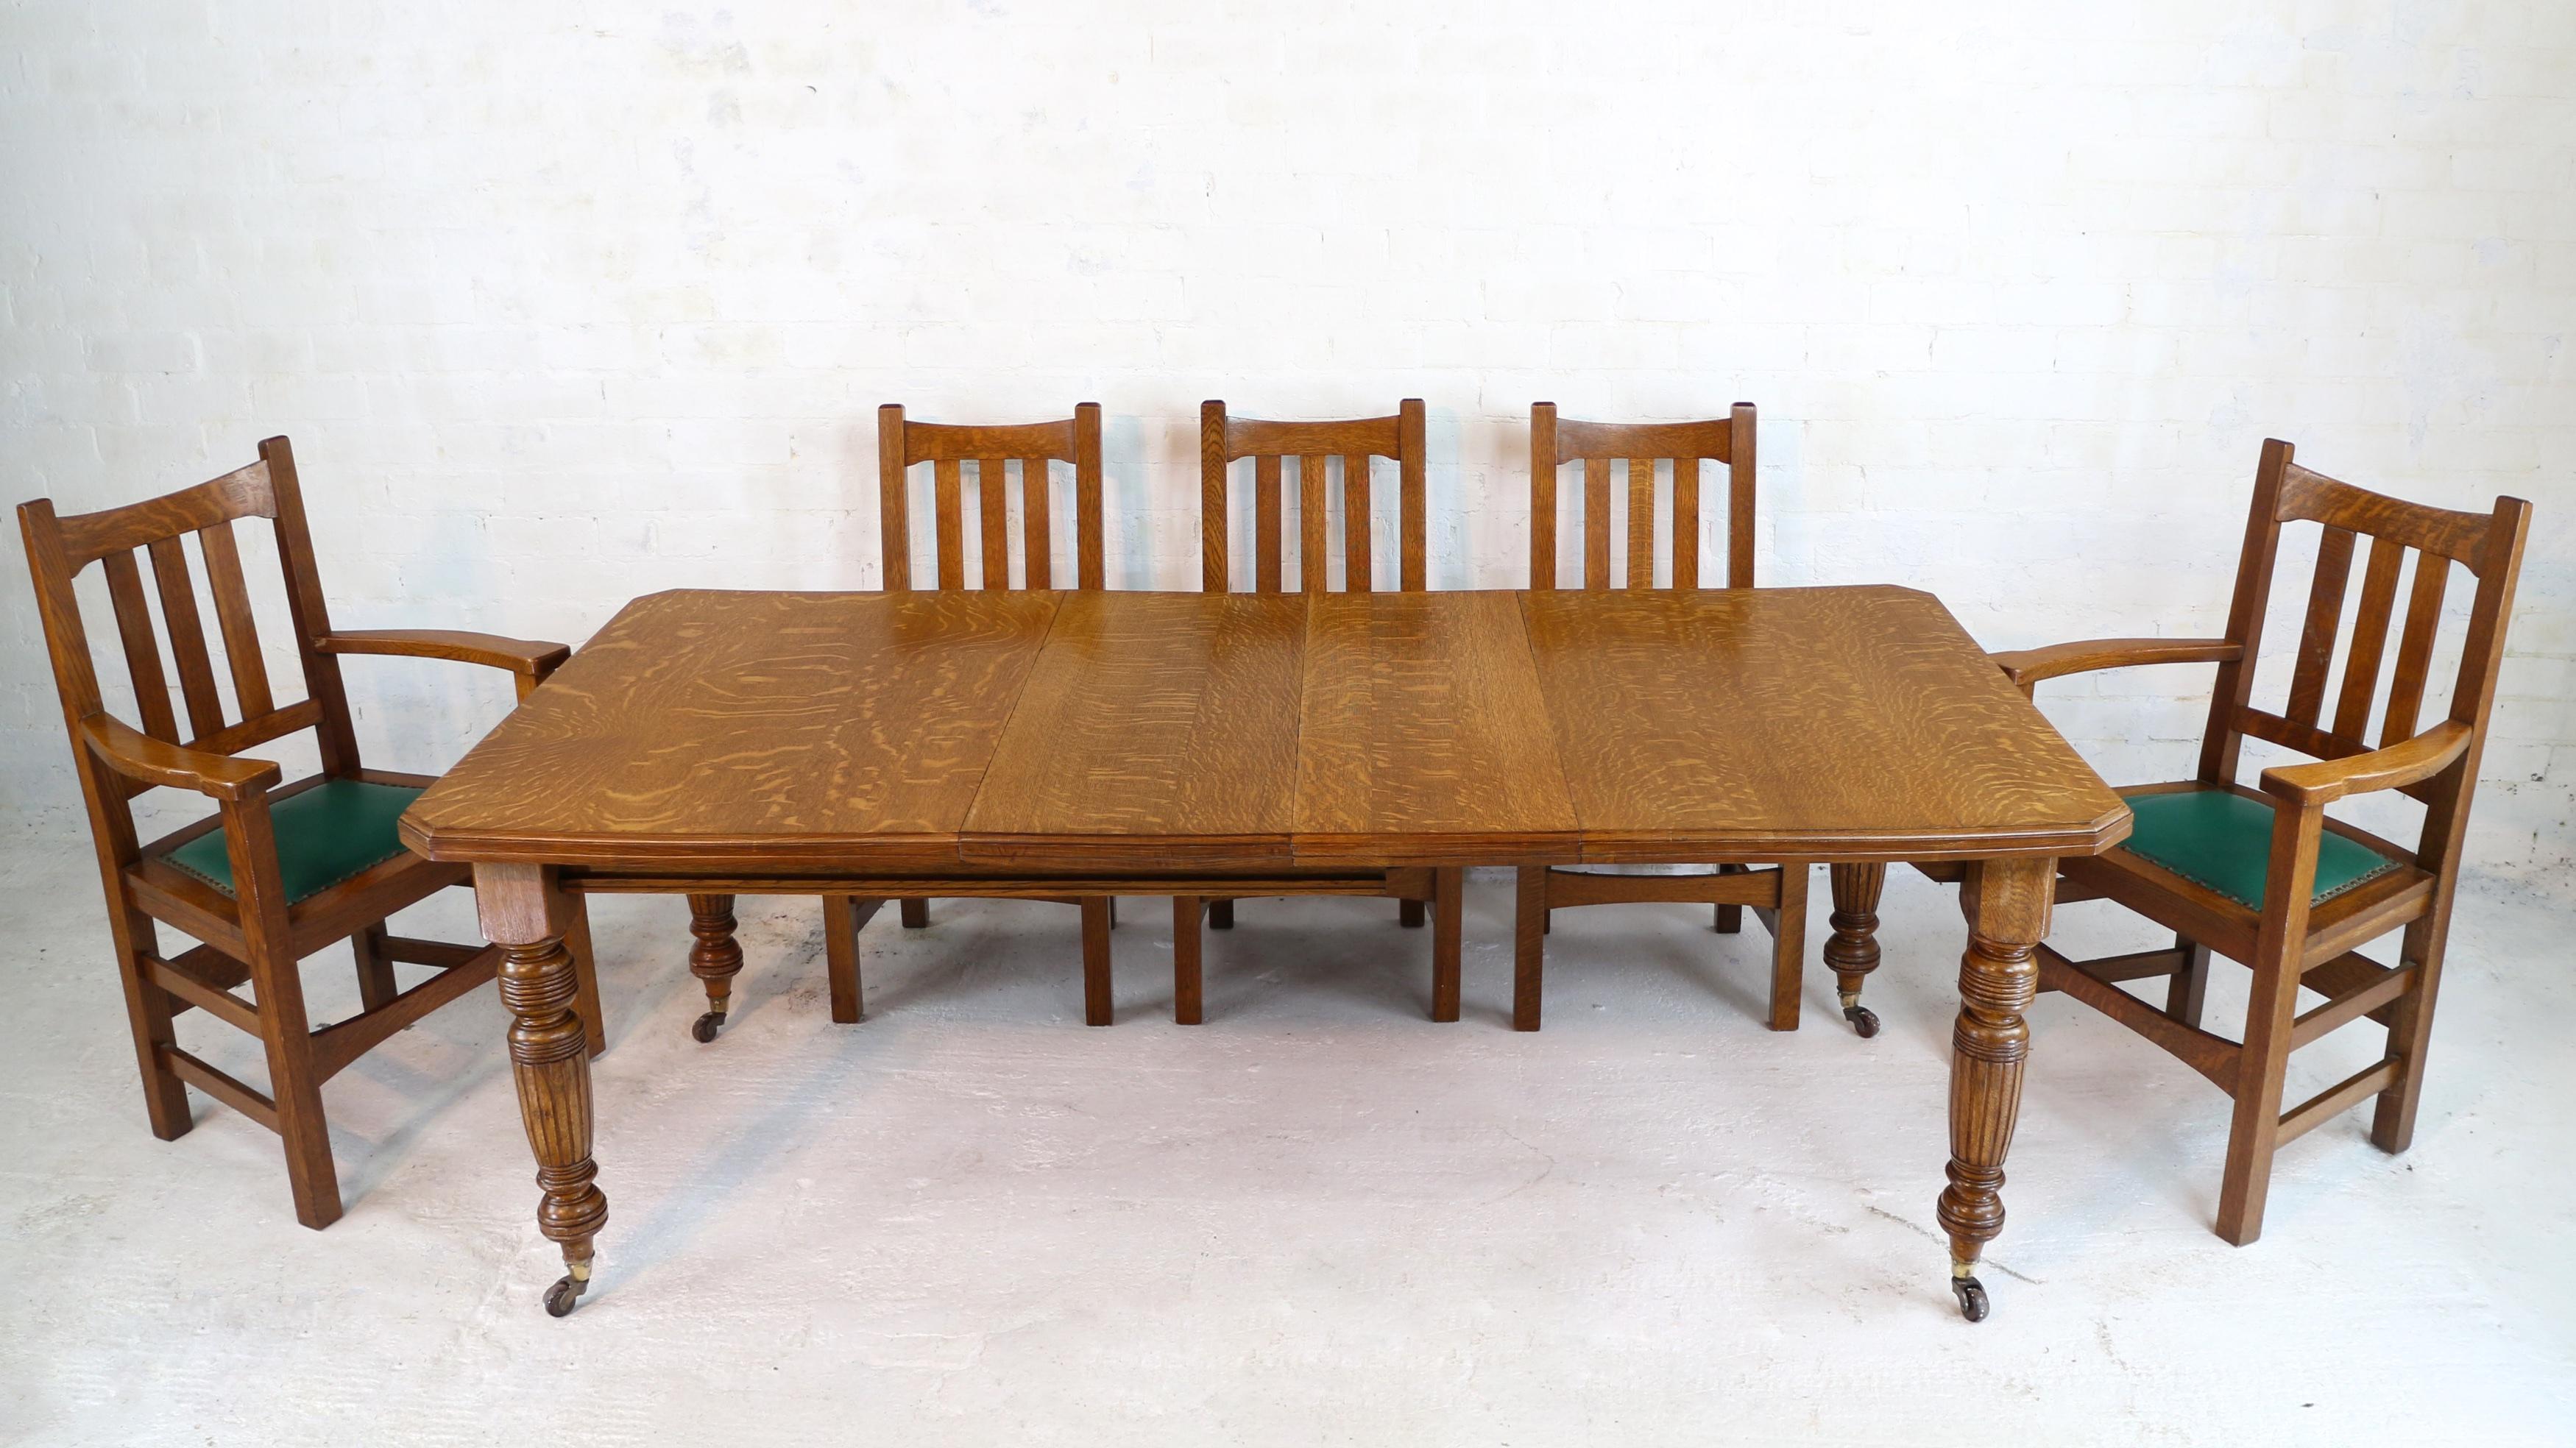 An attractive late Victorian small wind-out extending dining table in quarter-sawn oak with two original leaves and dating to circa 1880. With an Arts & Crafts influence it has a rectangular top with canted corners and a moulded edge and stands on